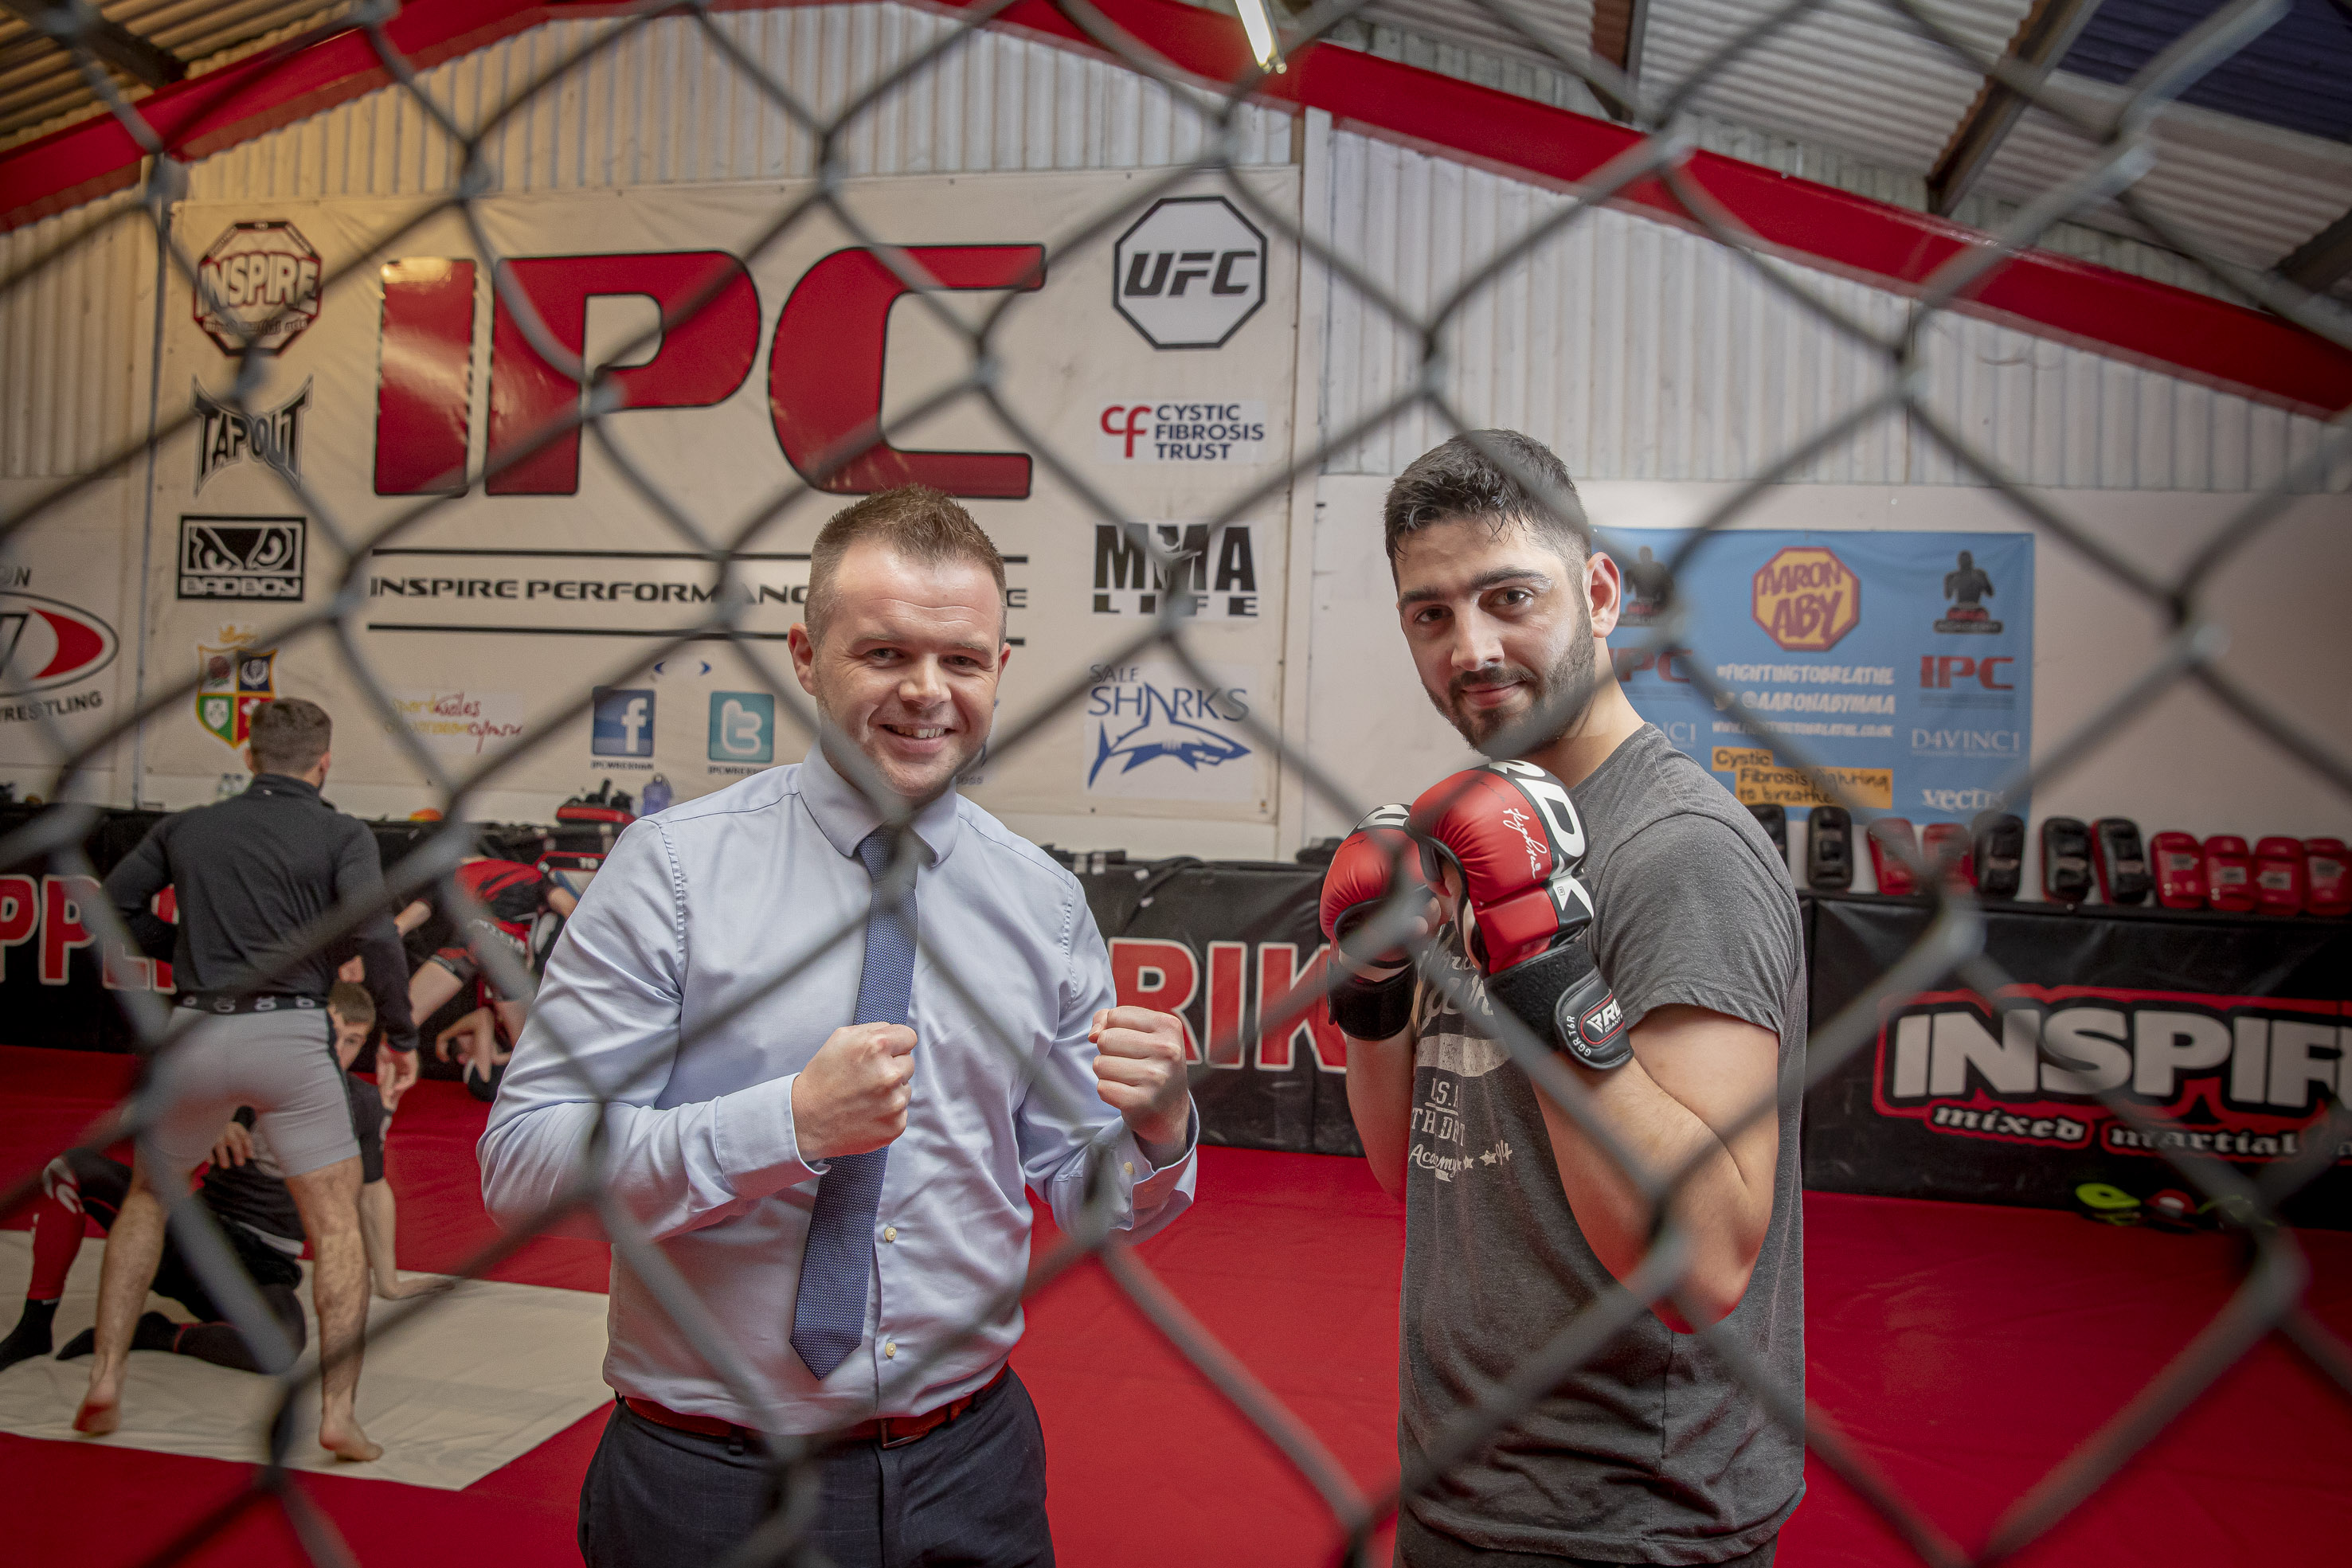 ‘Laid back’ IT engineer wins charity cage war event